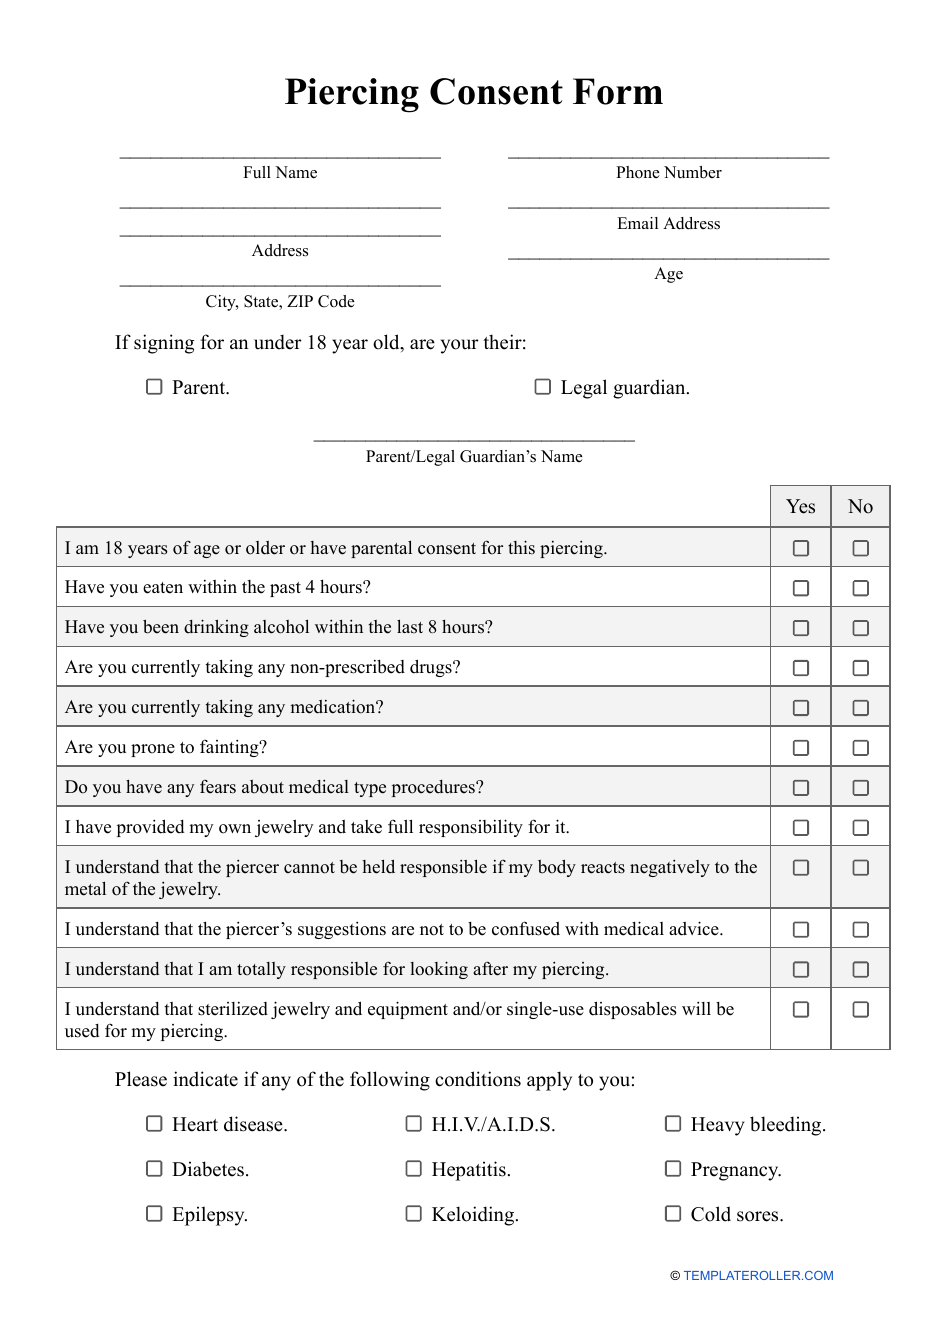 Piercing Consent Form Fill Out Sign Online and Download PDF